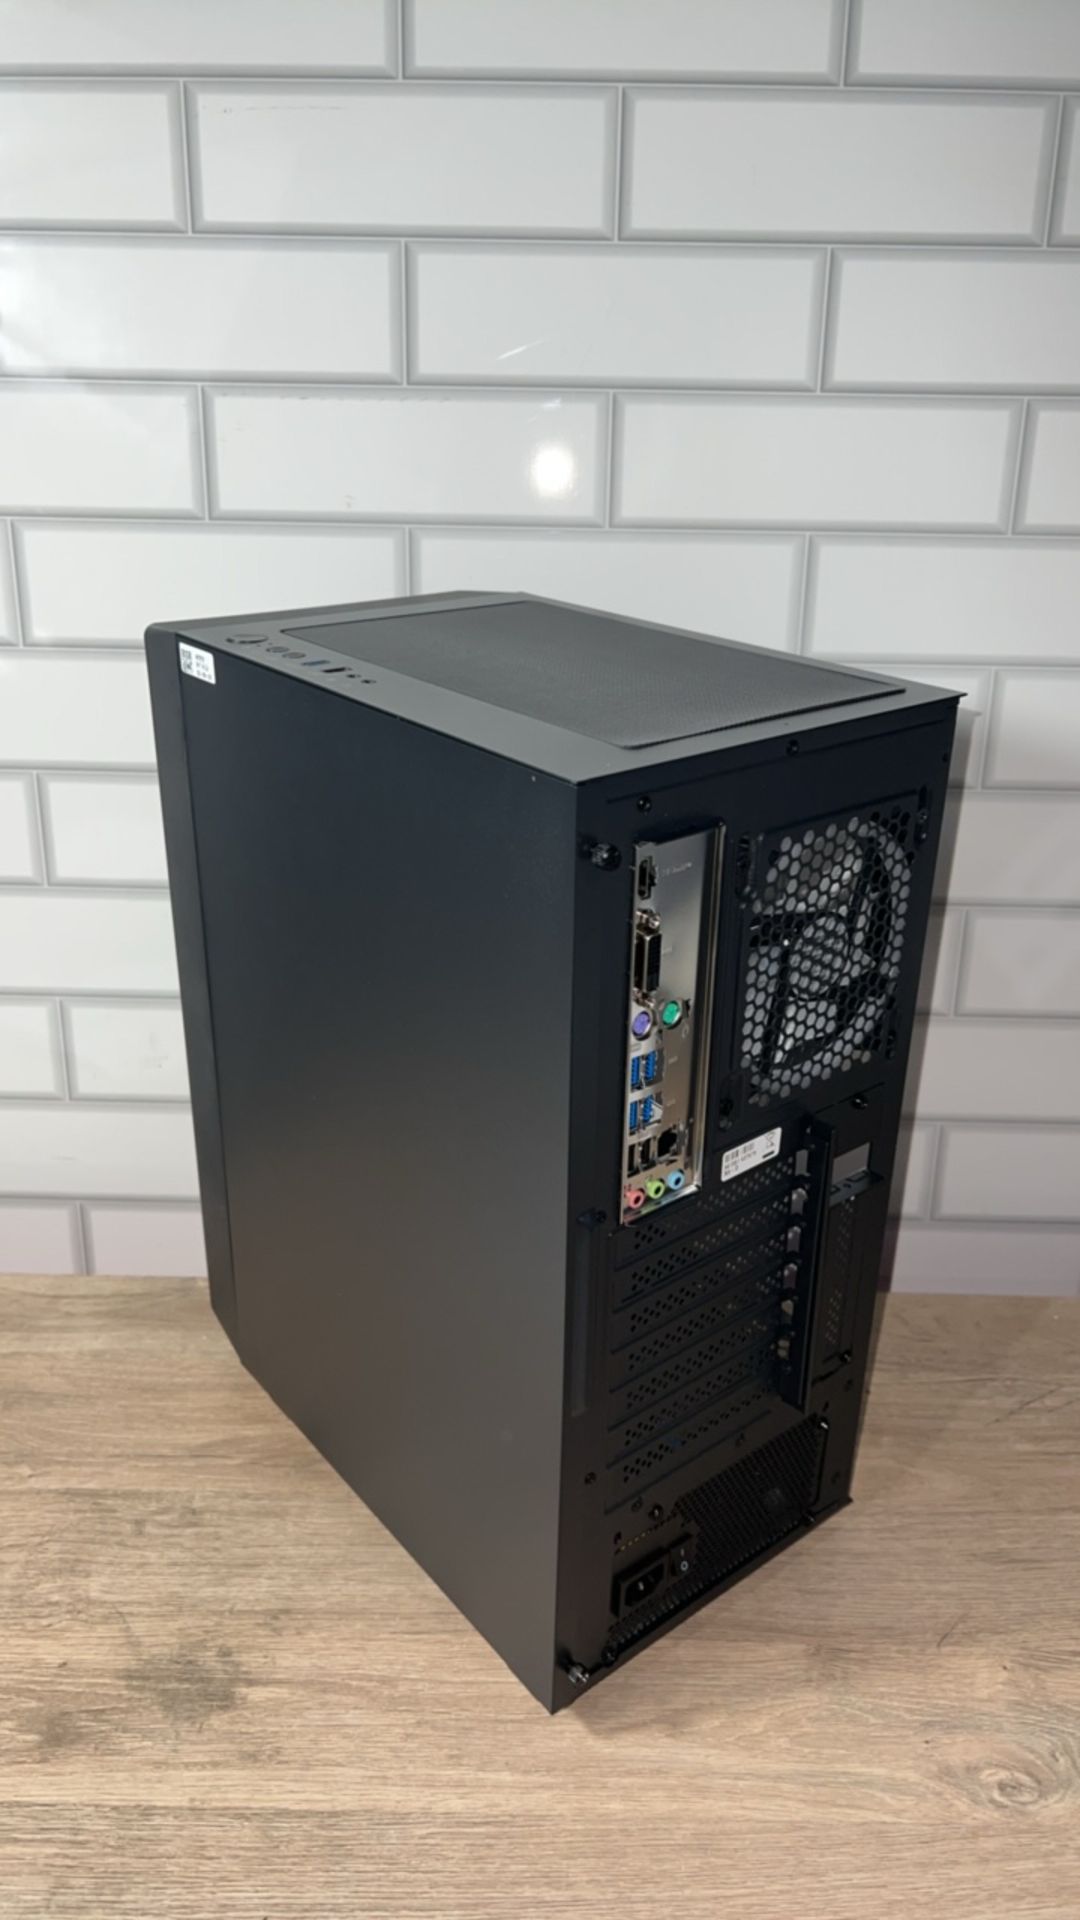 Cyberpower Eurus PC Tower - Image 5 of 8